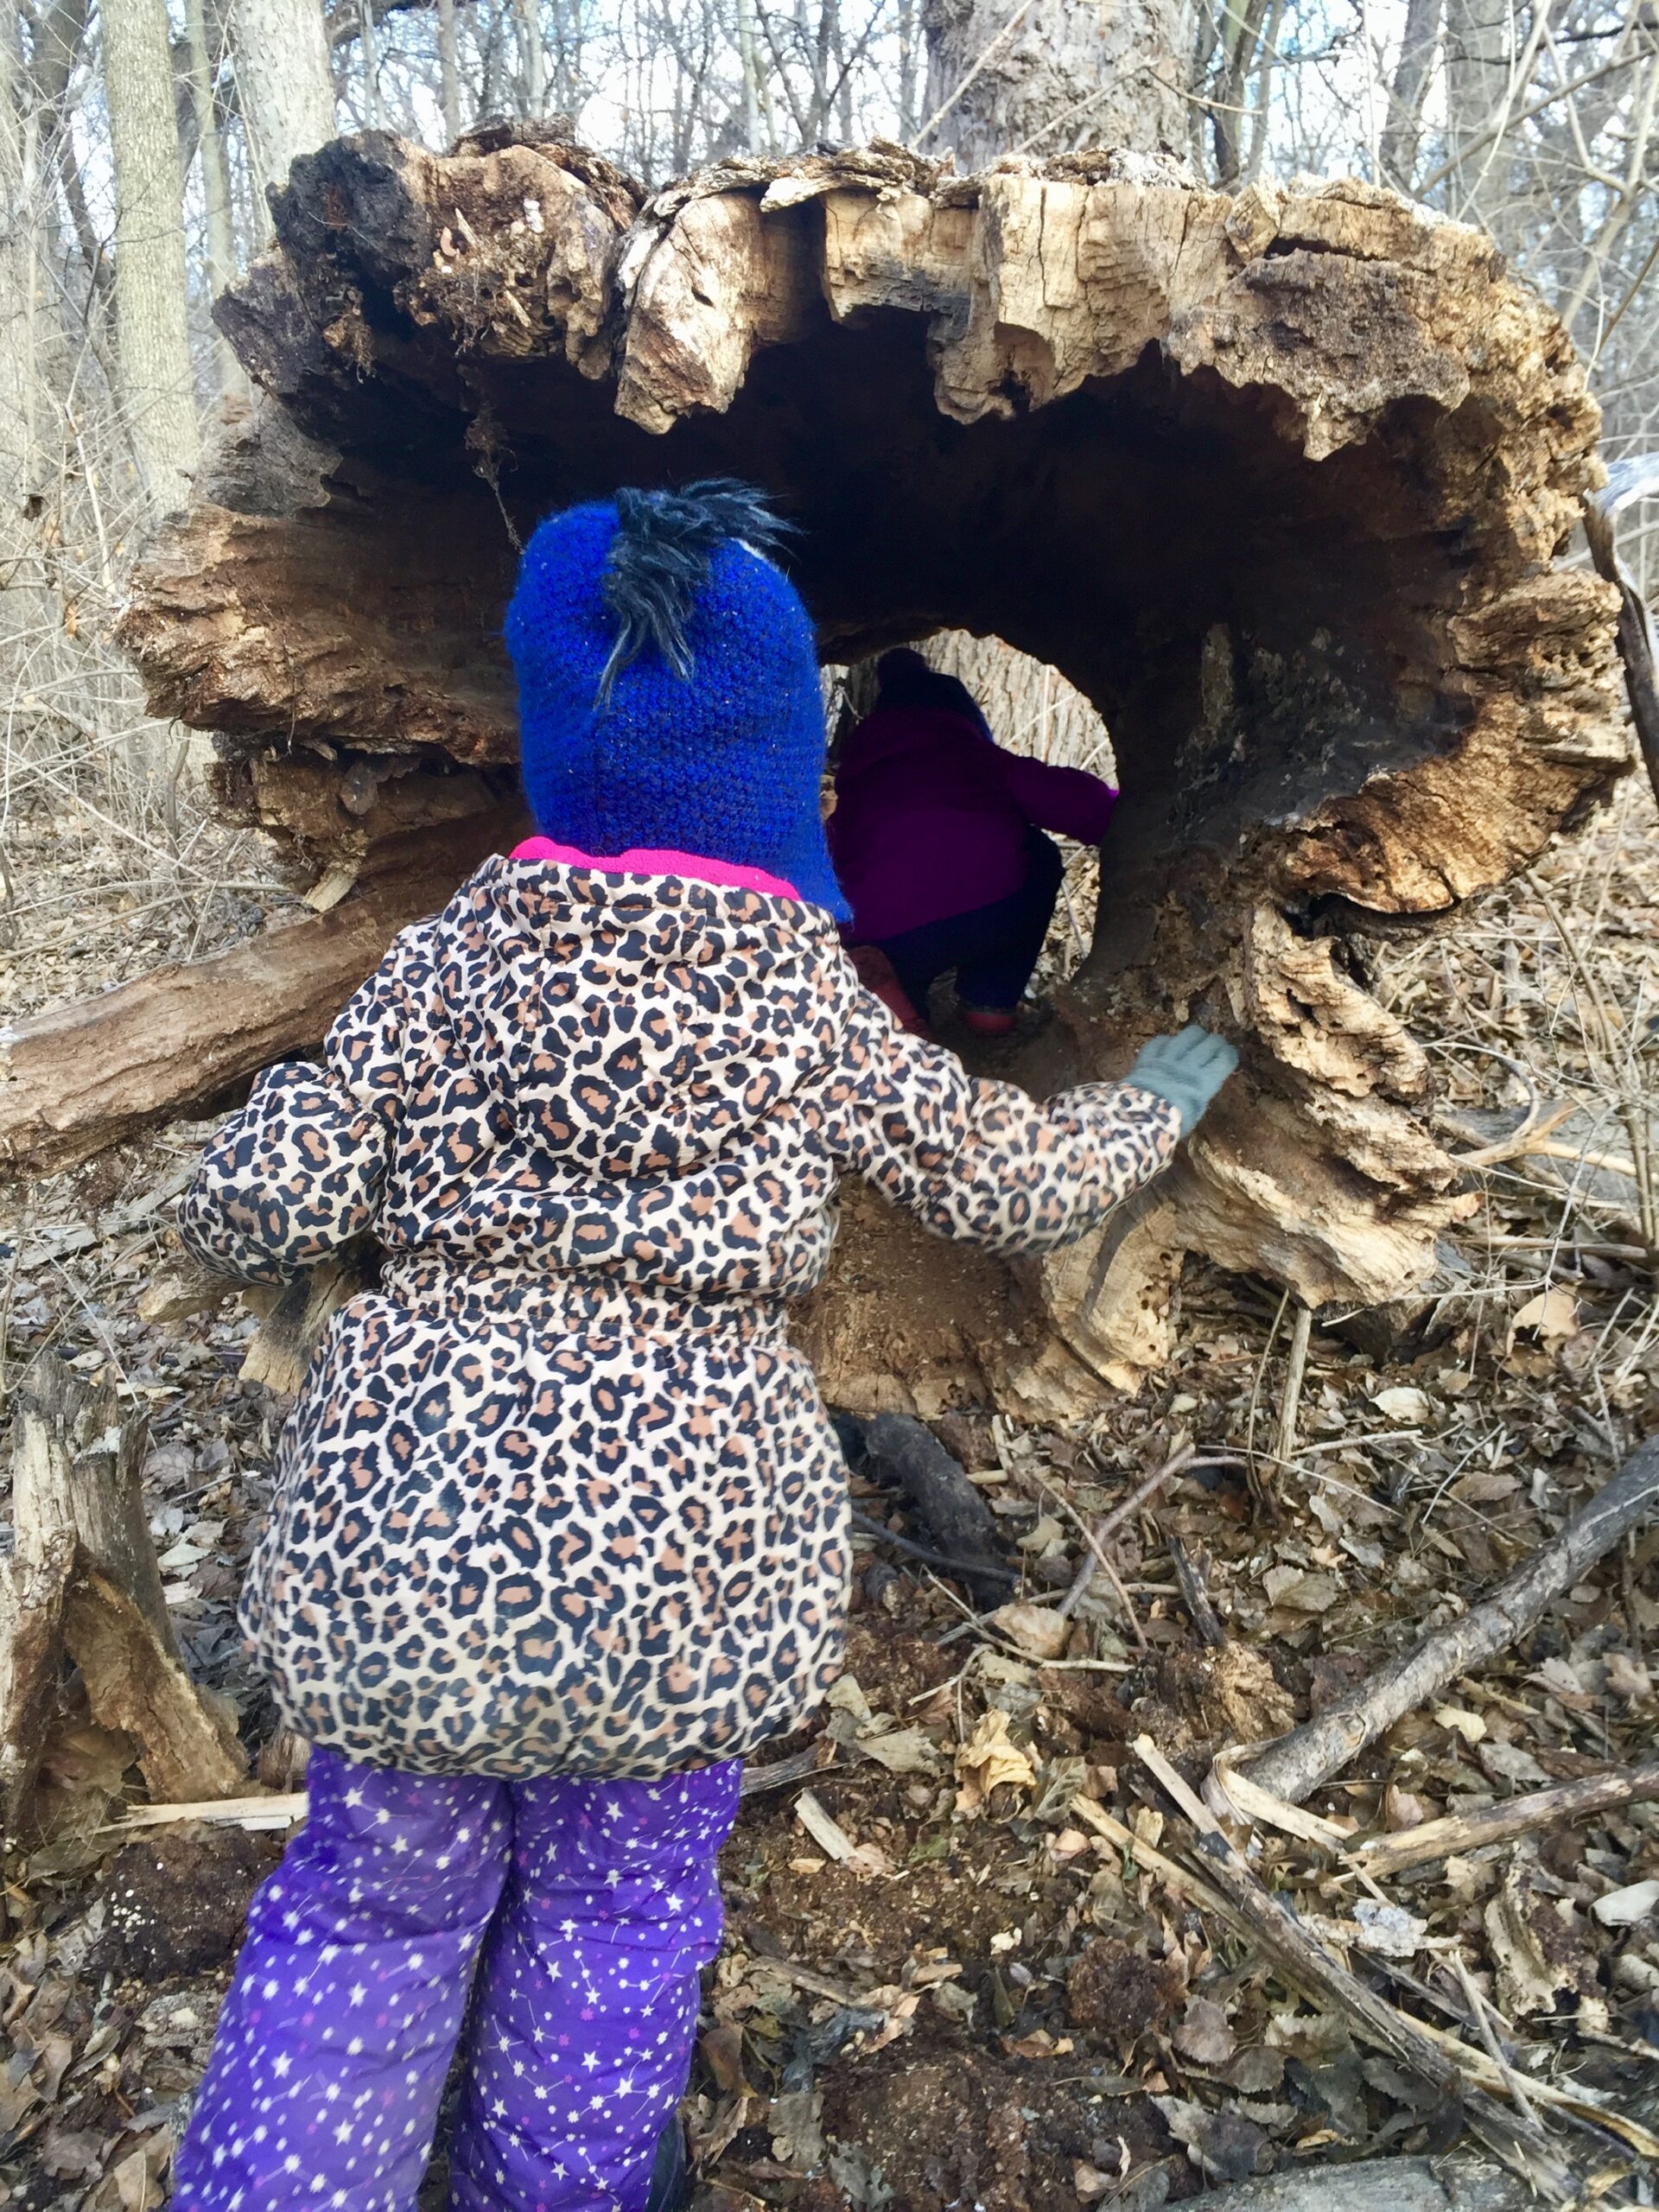 two children explore a large hollow log